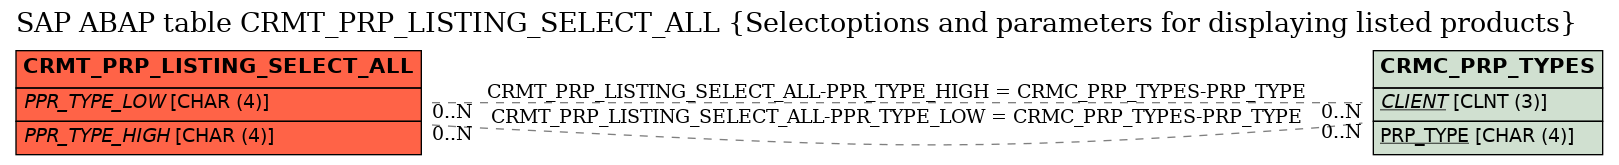 E-R Diagram for table CRMT_PRP_LISTING_SELECT_ALL (Selectoptions and parameters for displaying listed products)